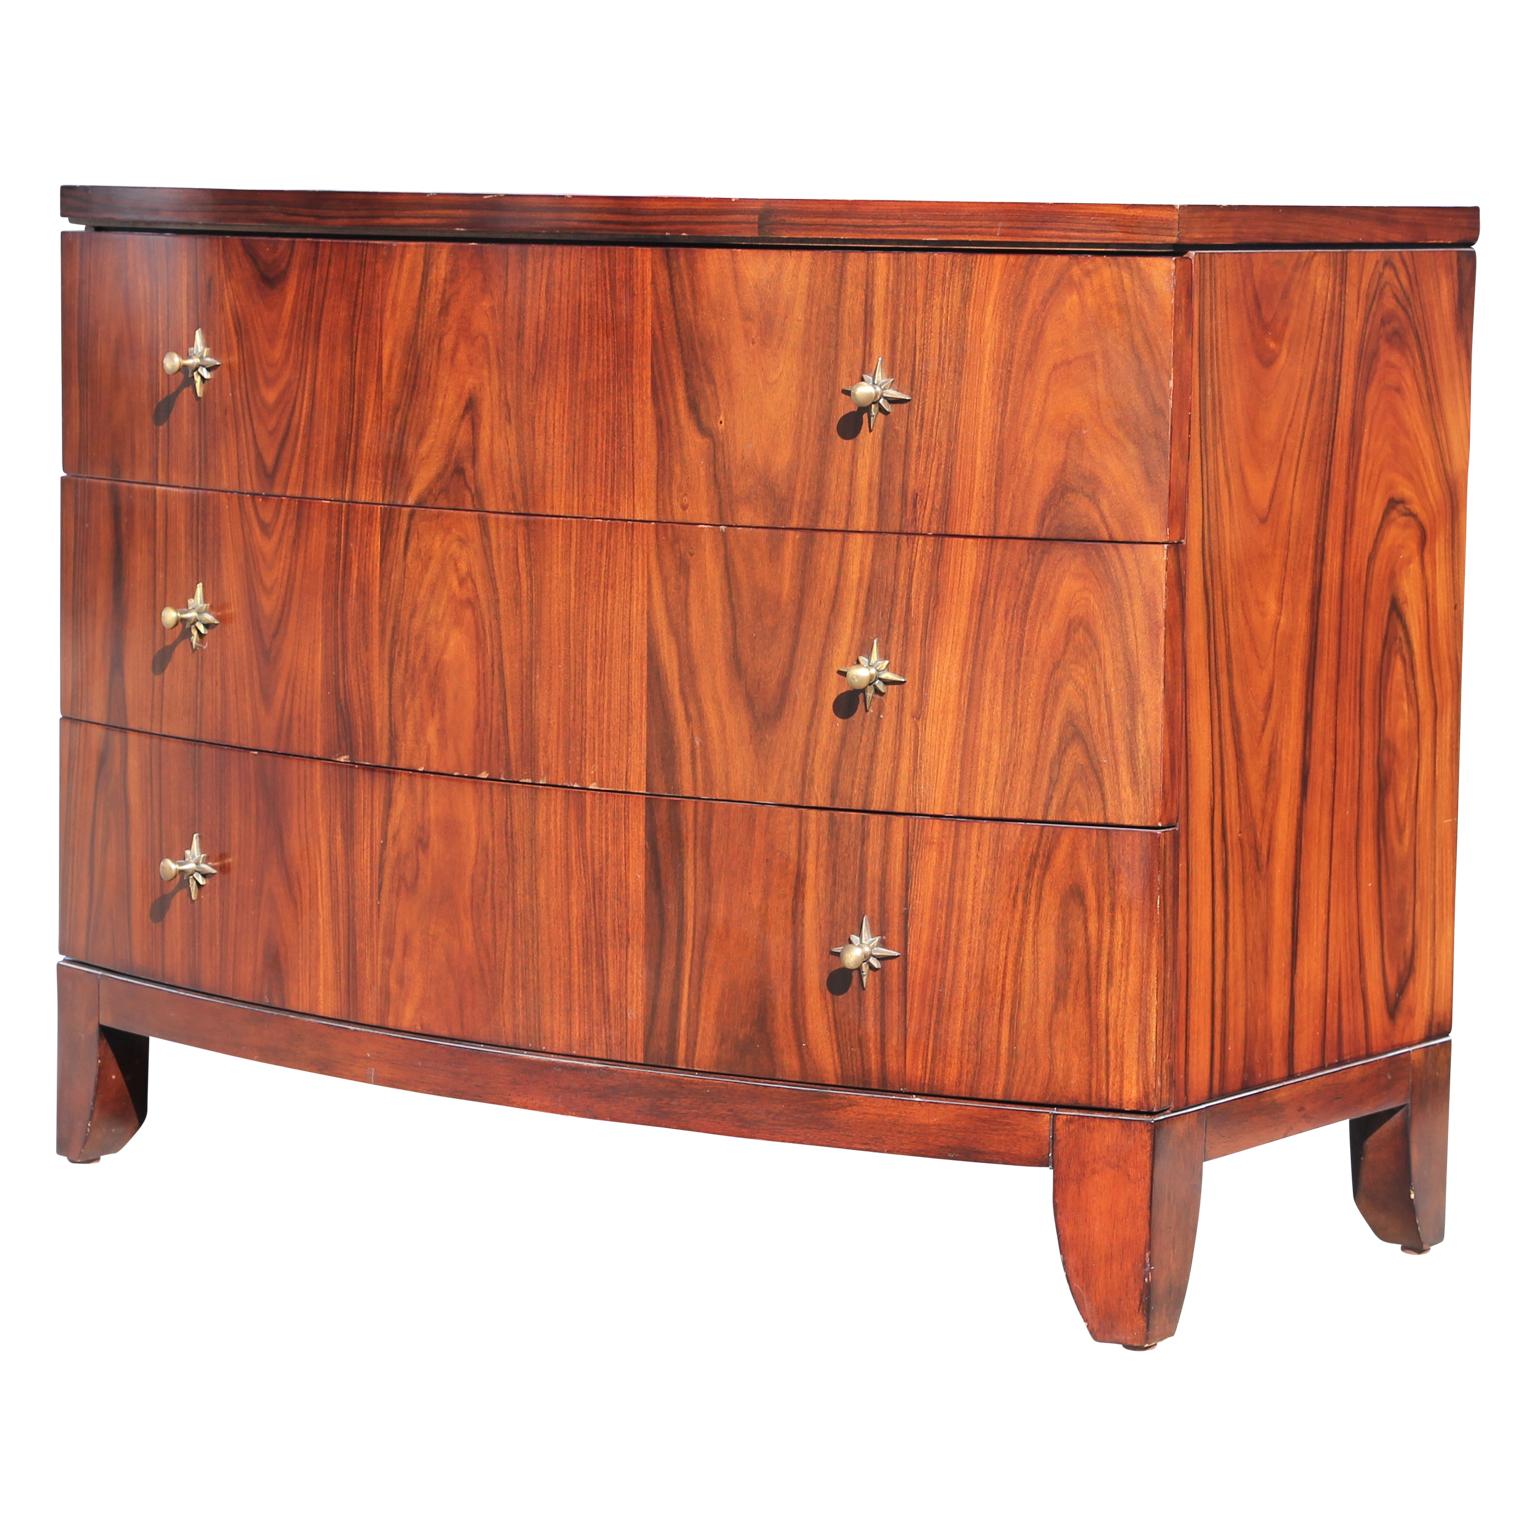 Small curved modern rosewood three-drawer chest bronze color starburst hardware. Made by Bernhardt, circa late 20th century. Nice vintage condition.